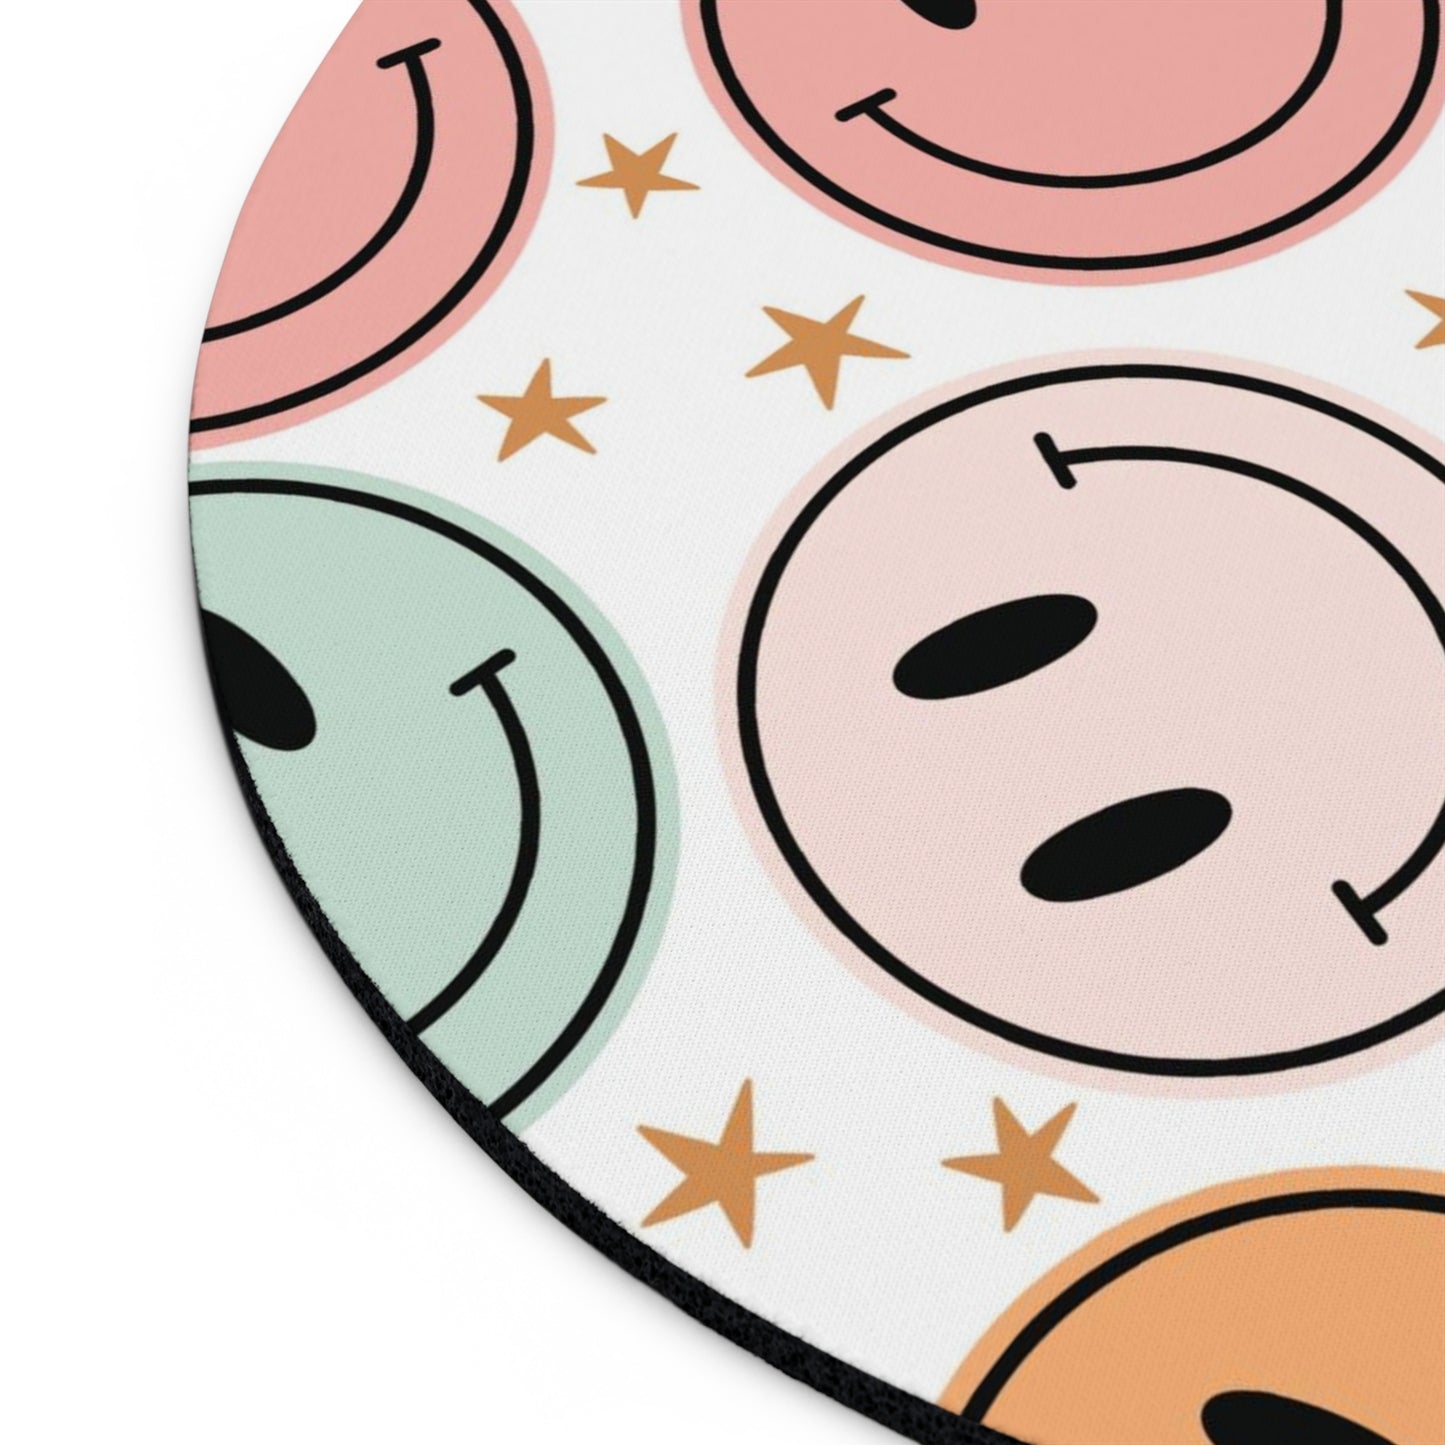 Retro smiley face with stars teacher Mouse Pad